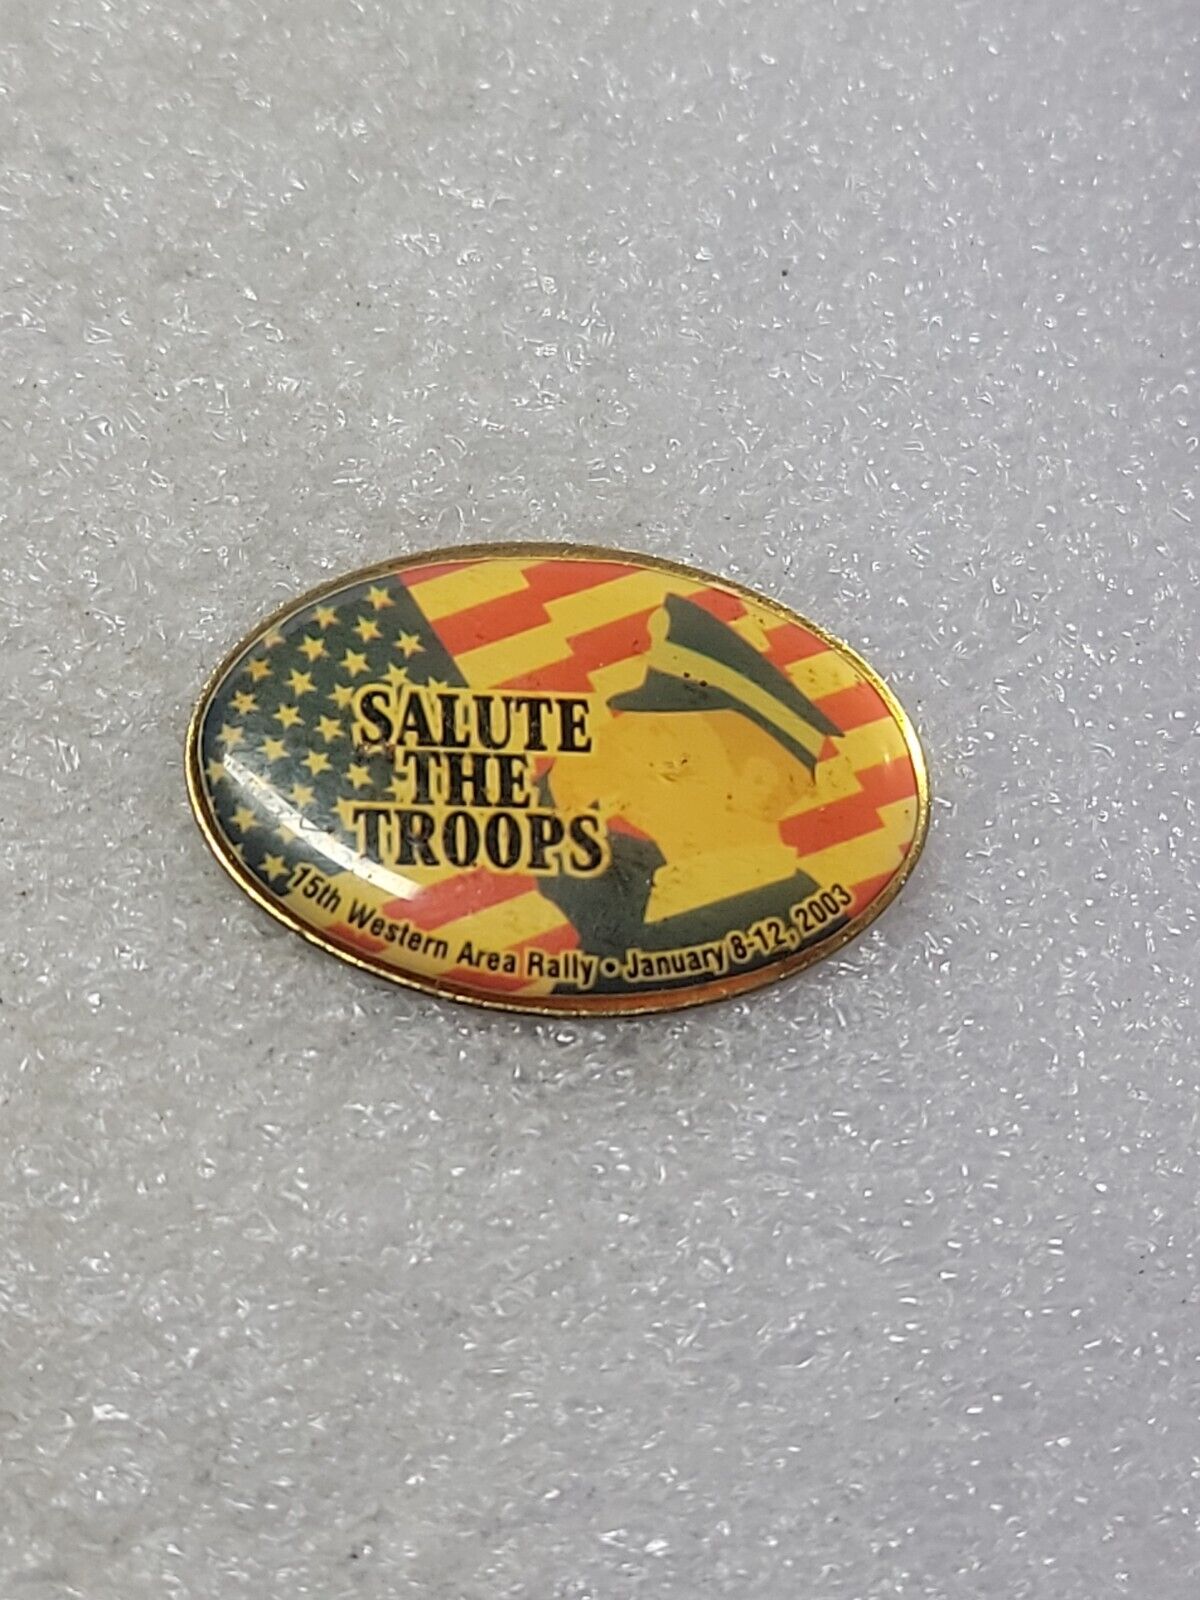 2003 Salute The Troops Patriotic Western Area Rally Pin Union Made in USA Clutch